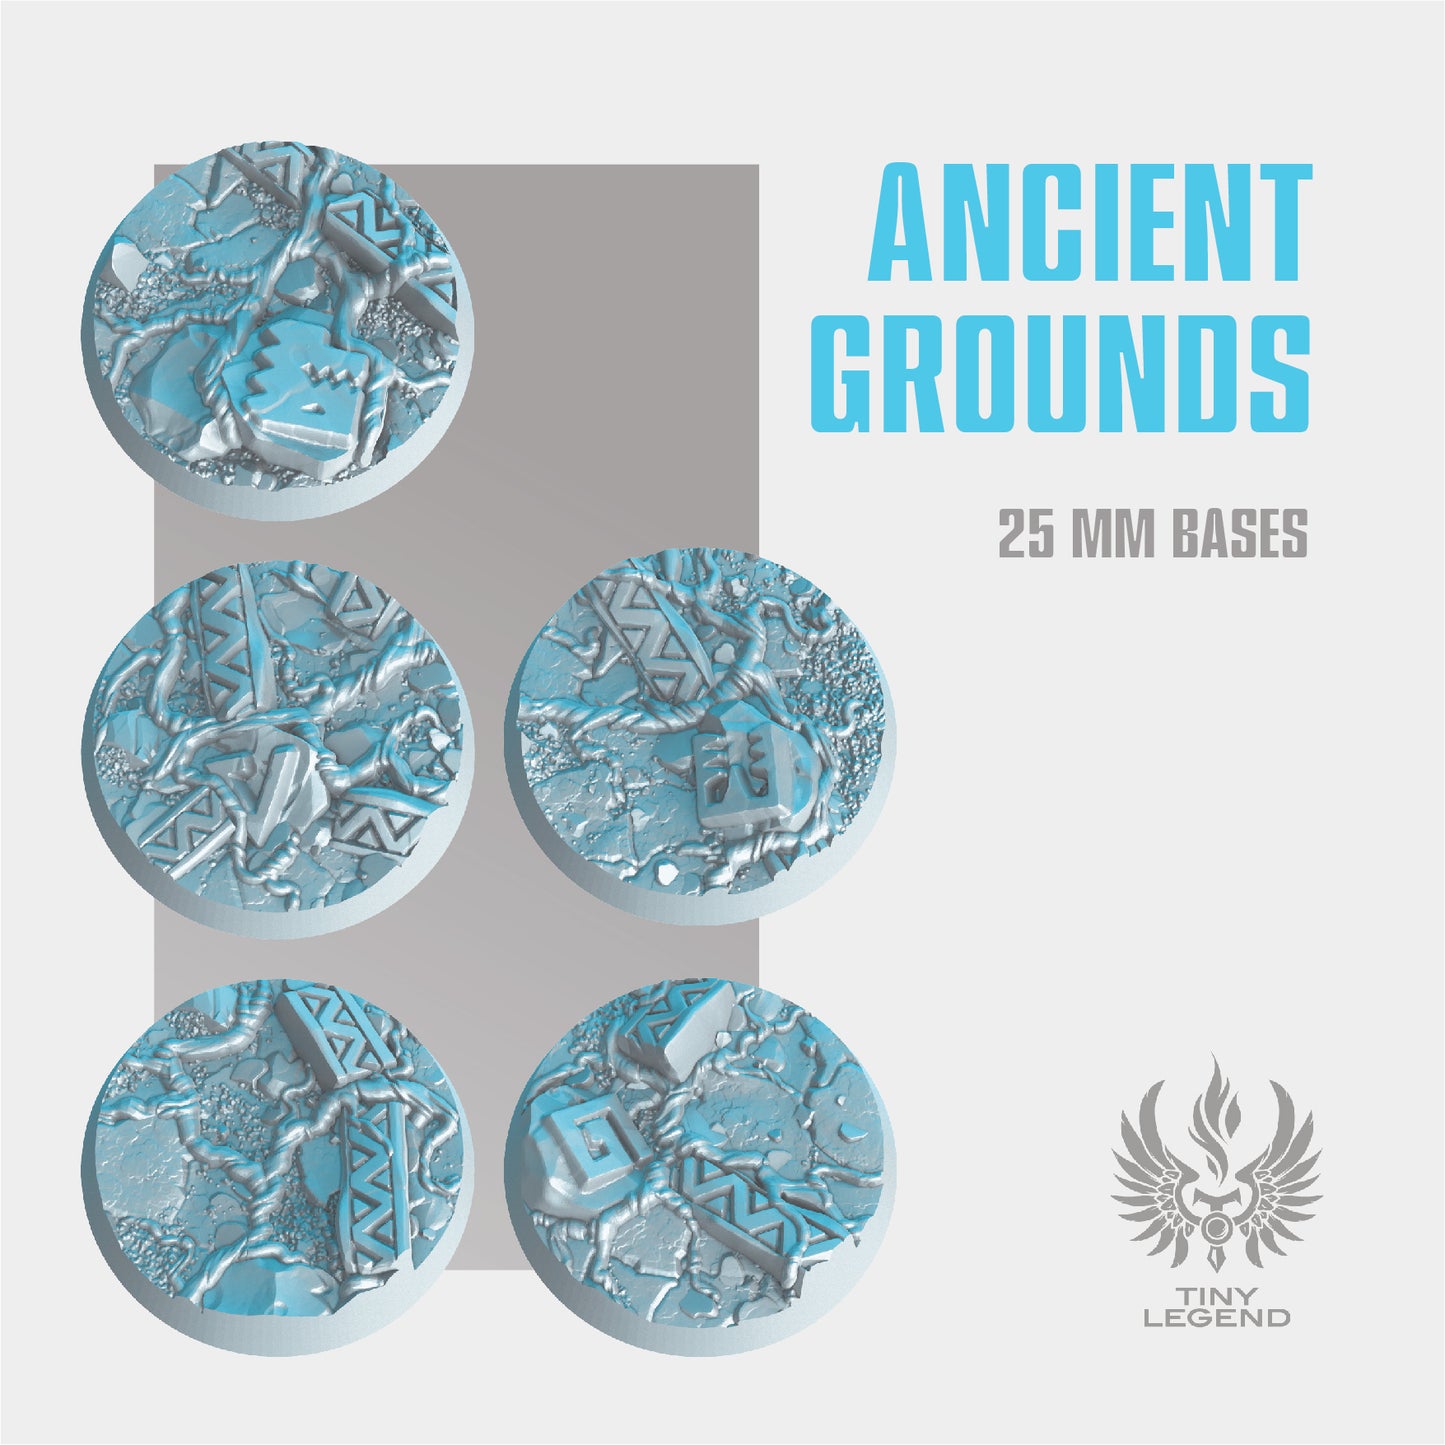 Ancient grounds bases 25 mm STL